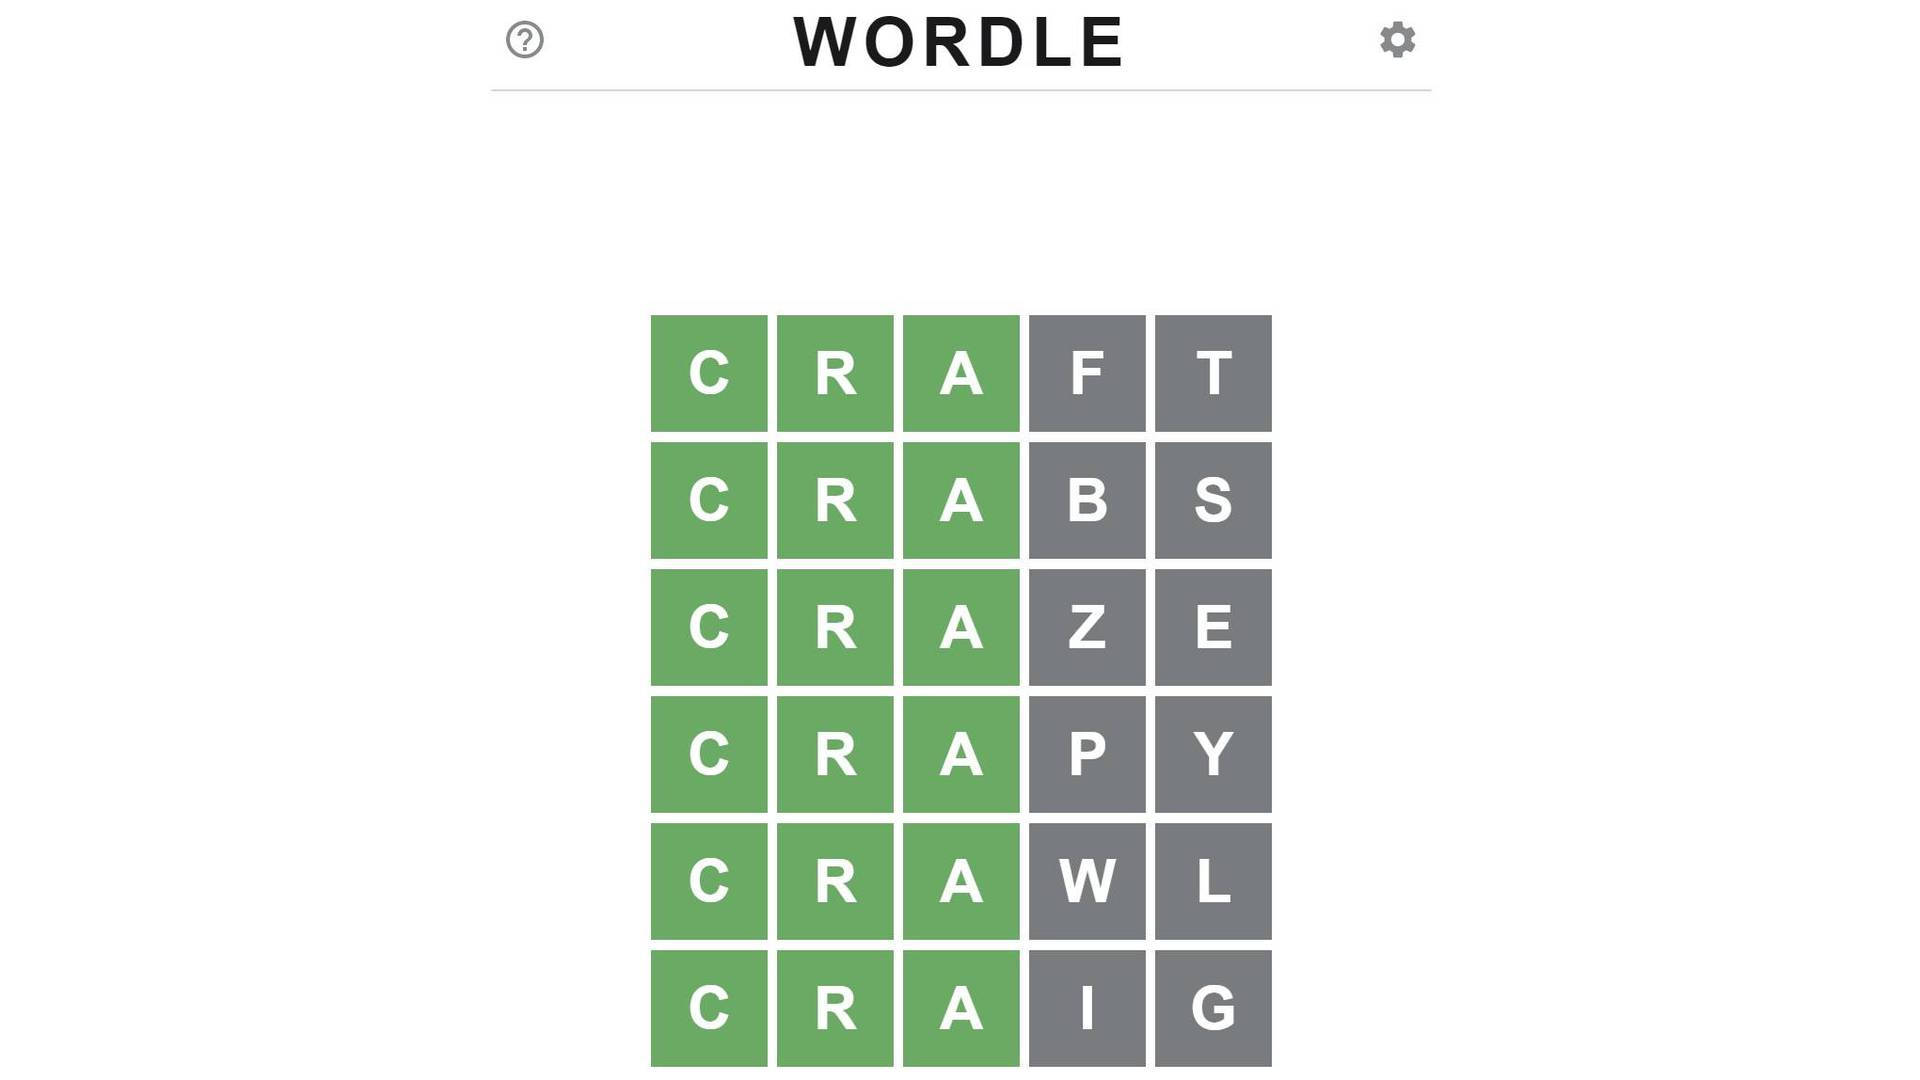 Caption: Exciting Wordle Puzzle Game Challenge Wallpaper